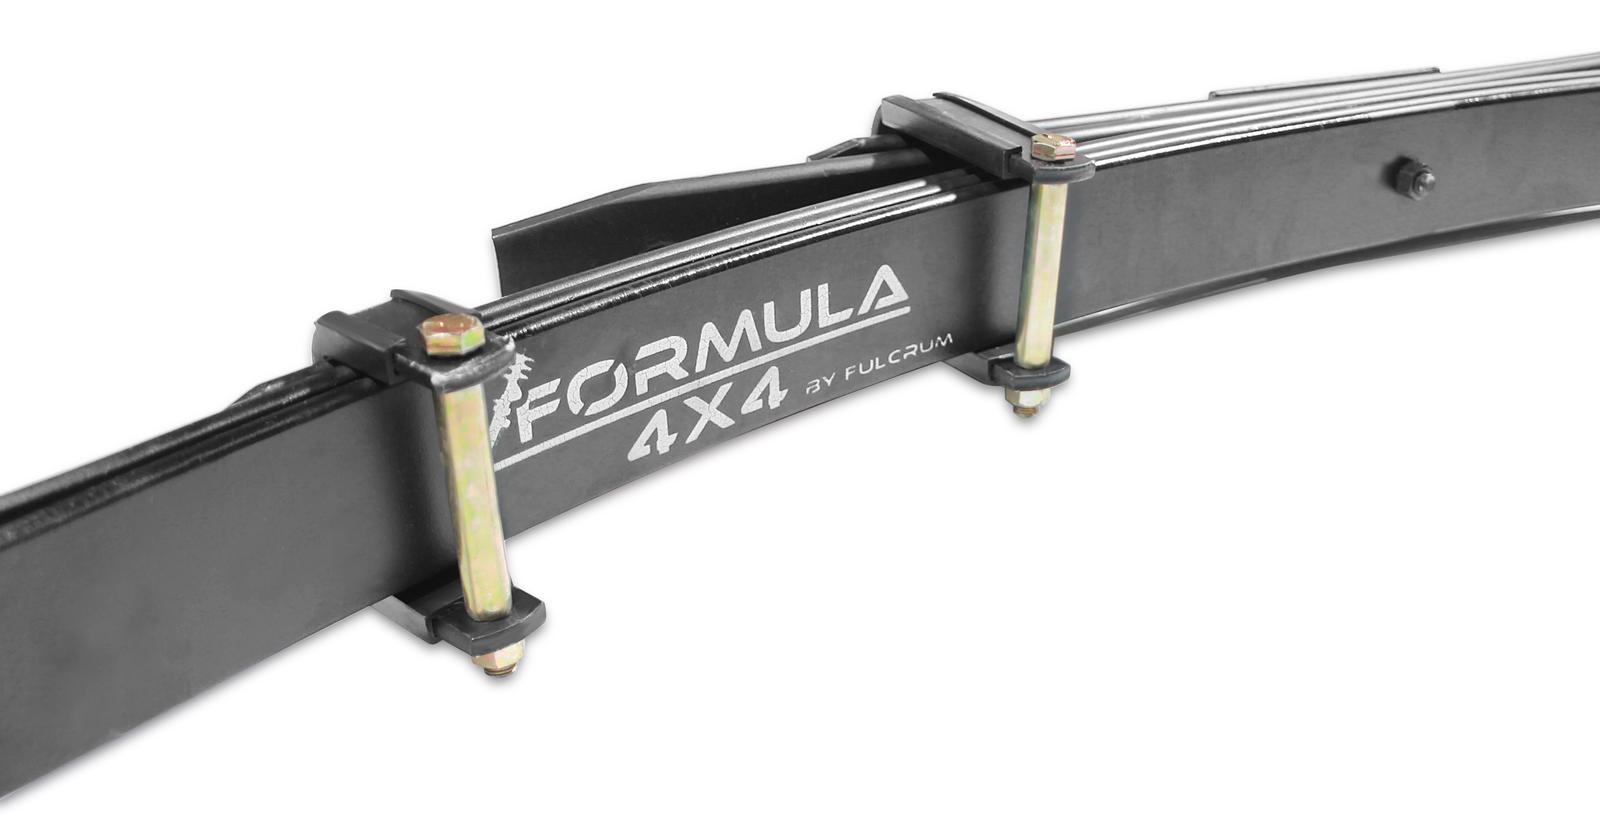 Formula Single Rear Leaf Spring - 40mm Lift at 150kg to suit Toyota Hilux 83-97, 88-03 and 97-00